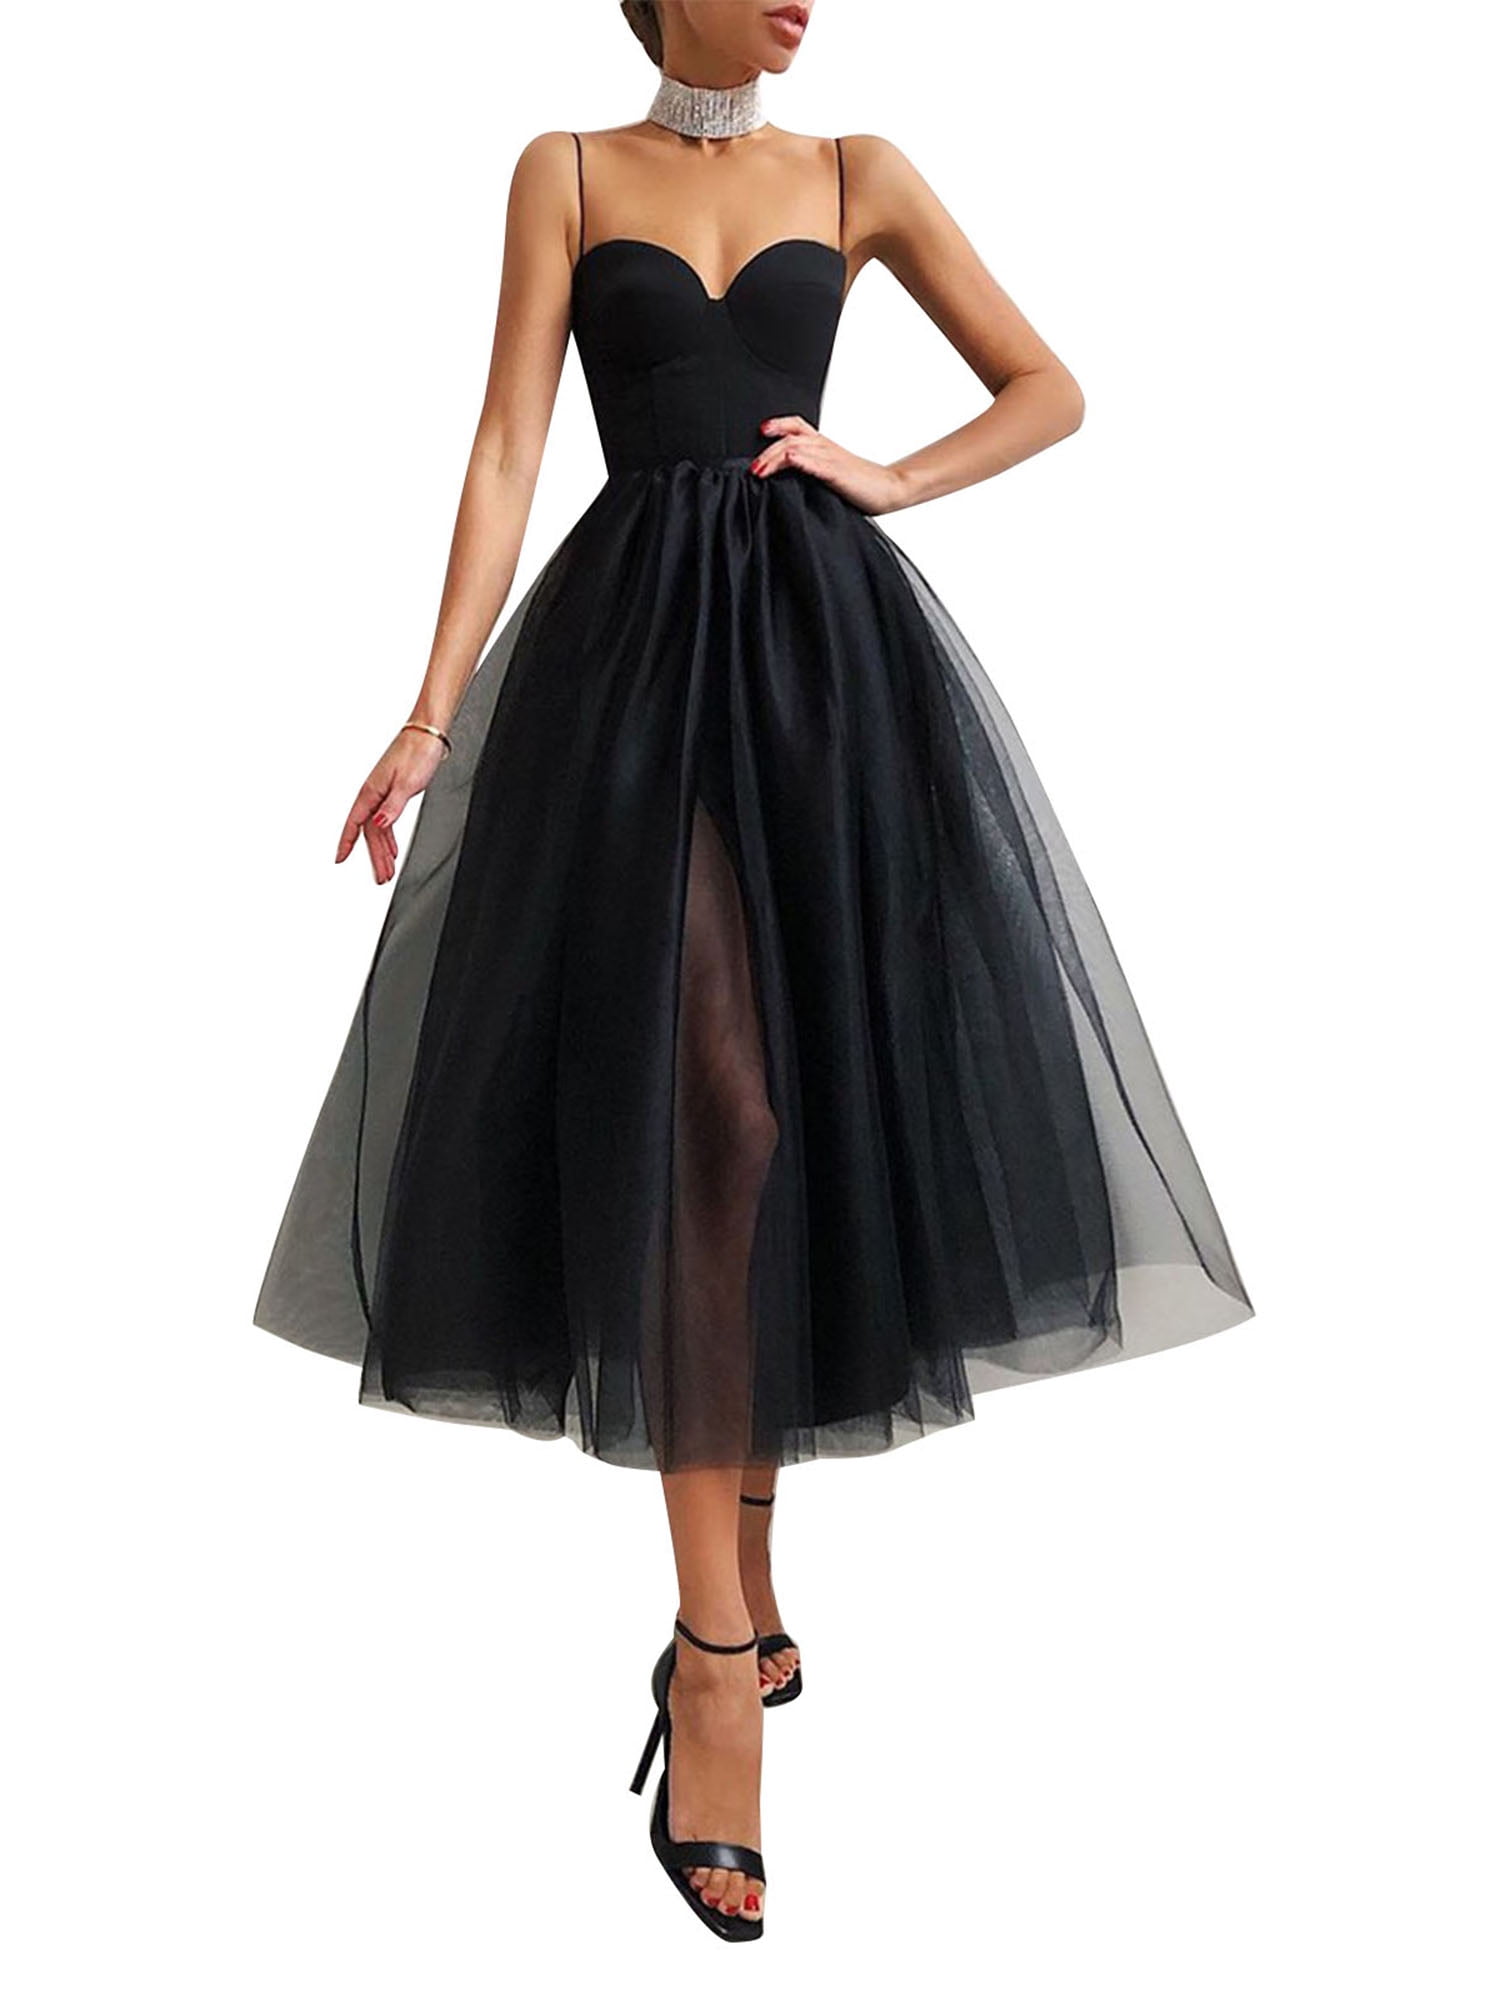 Womens Hi-Lo Bridesmaid Dress A Line Sweetheart Evening Party Prom Gowns Cocktail Dress